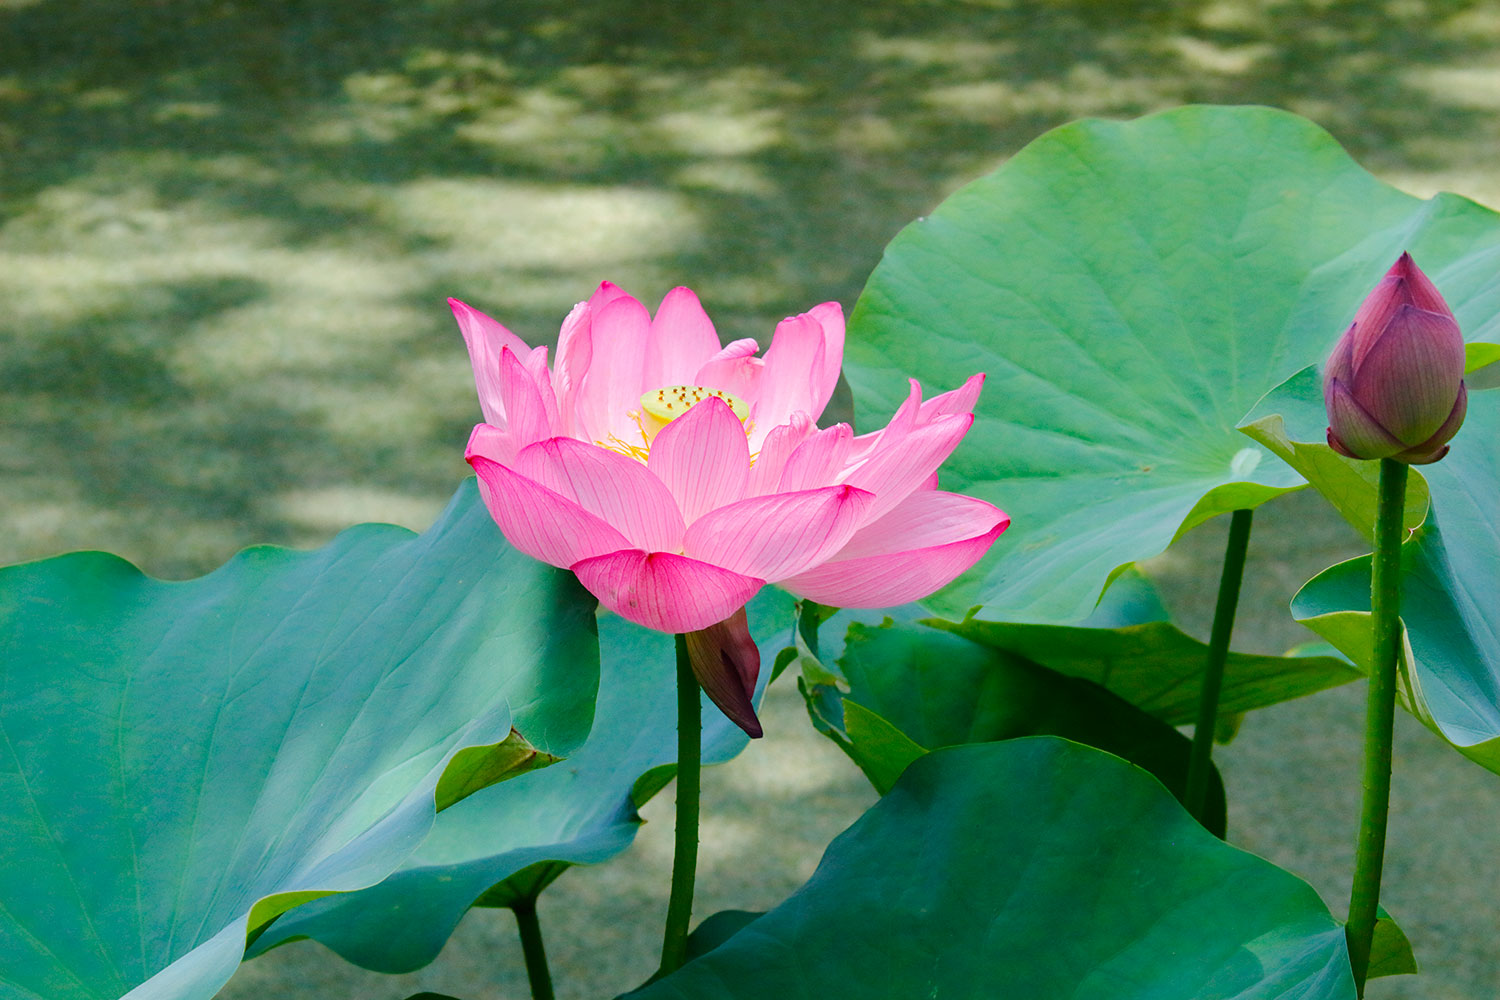 The lotus blooms, putting forth flower and fruit simultaneously; likewise, each young person inherently possesses the fruit of hope within. (Tokyo, July 2023)